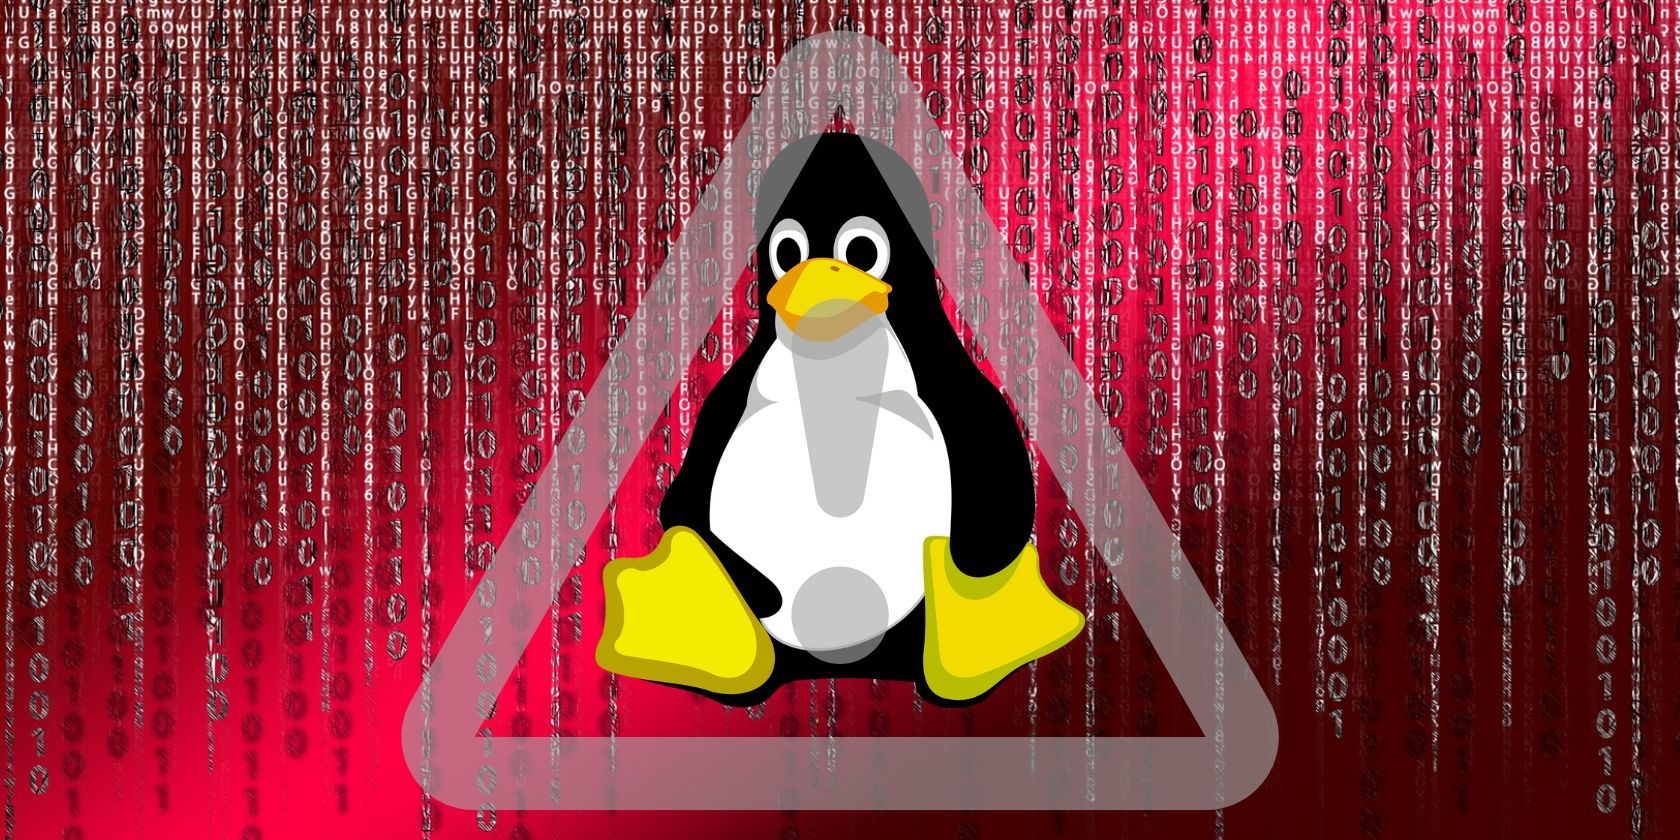 Linux Malware Found To Be at an All-Time High in 2022